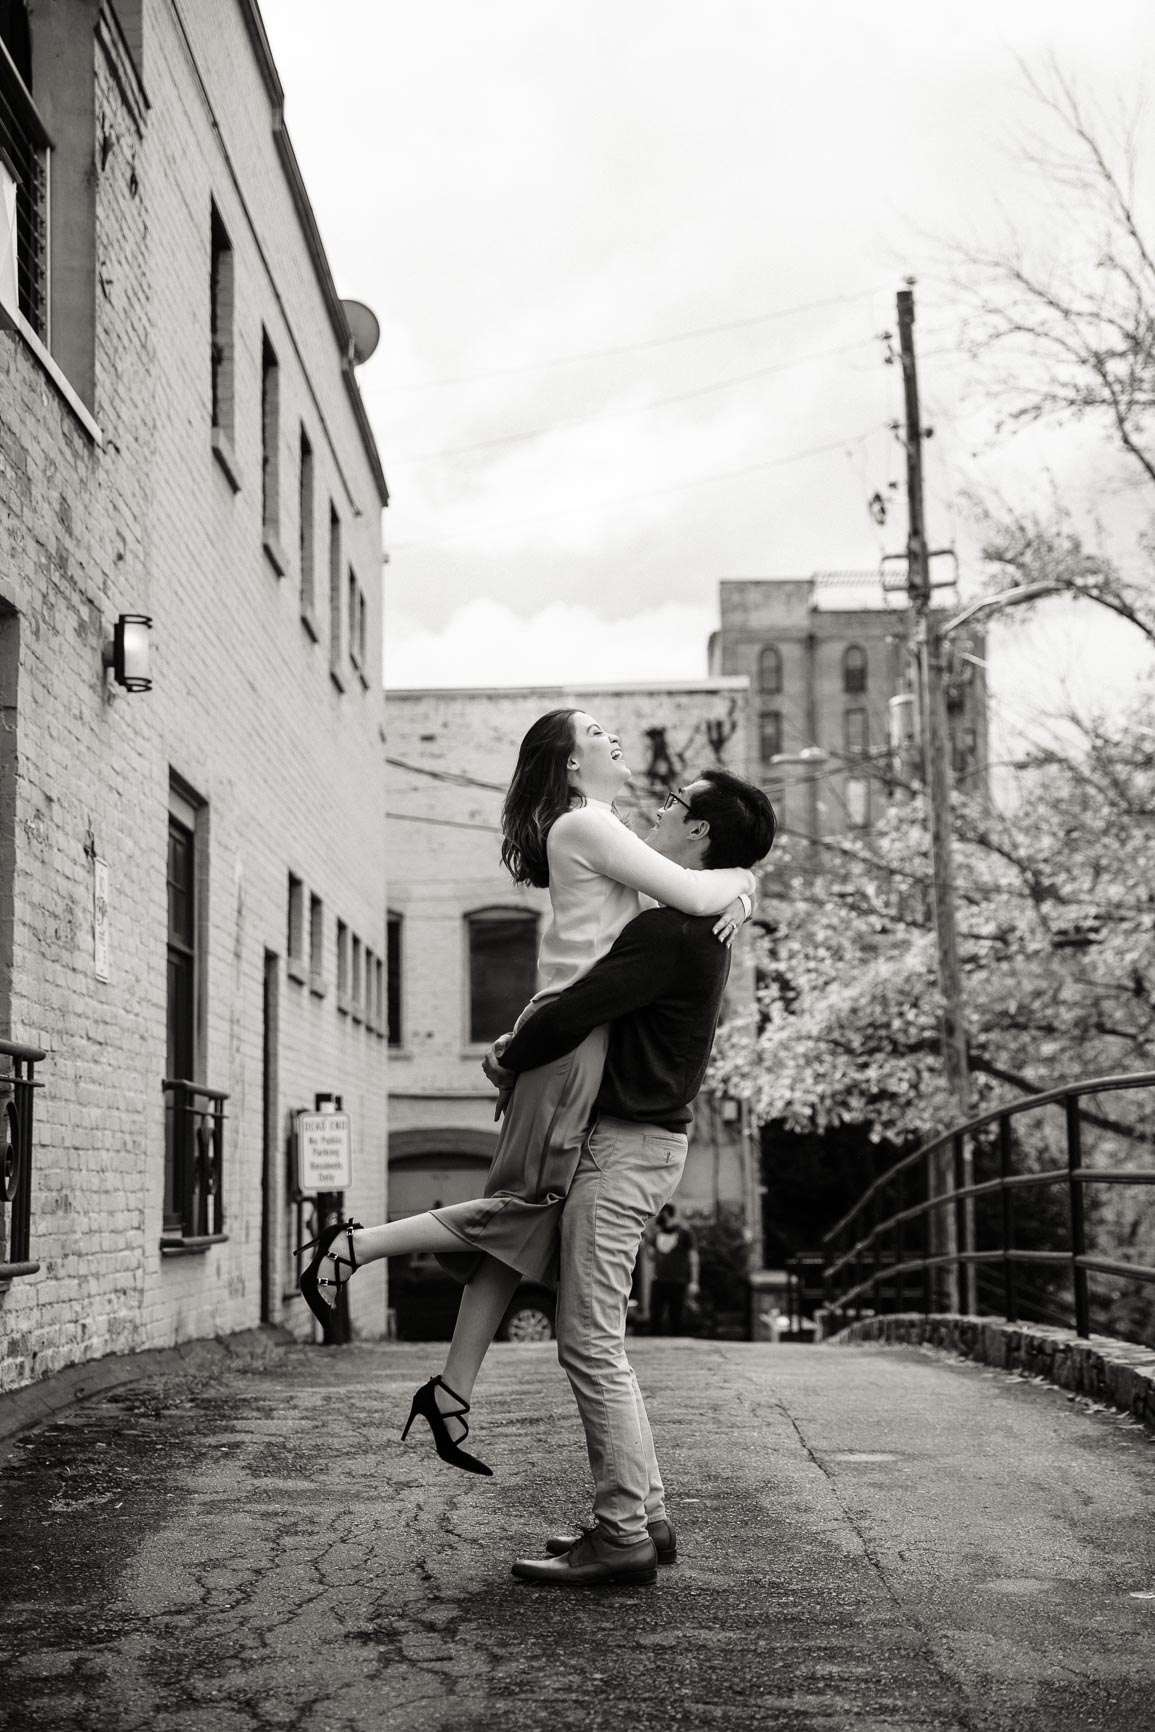 Fall engagement session in Downtown Asheville, North Carolina, shot by Nhieu Tang Photography | nhieutang.com